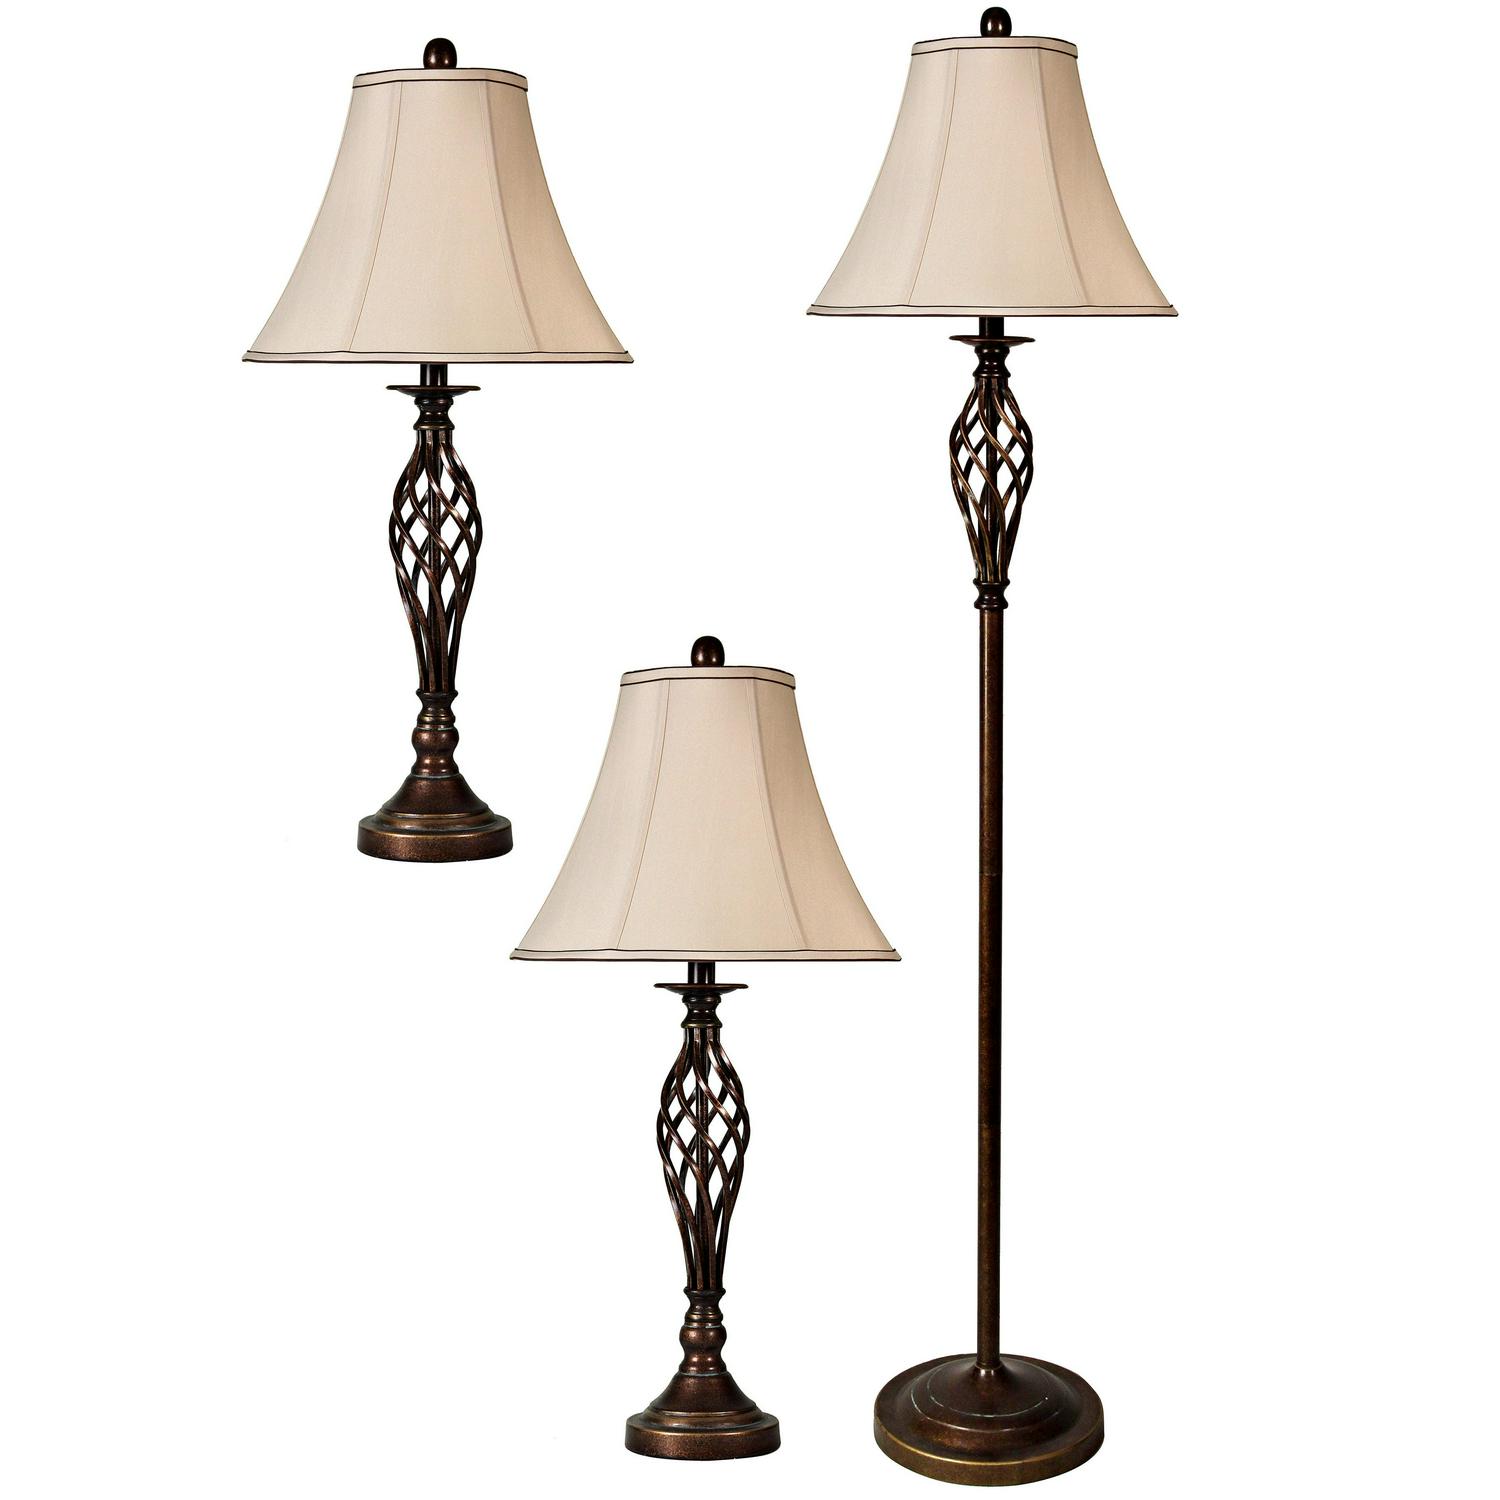 Barclay Table Lamp  Brass Finish  White Silk Shade  Set Of 3: 2 Table， 1 Floor